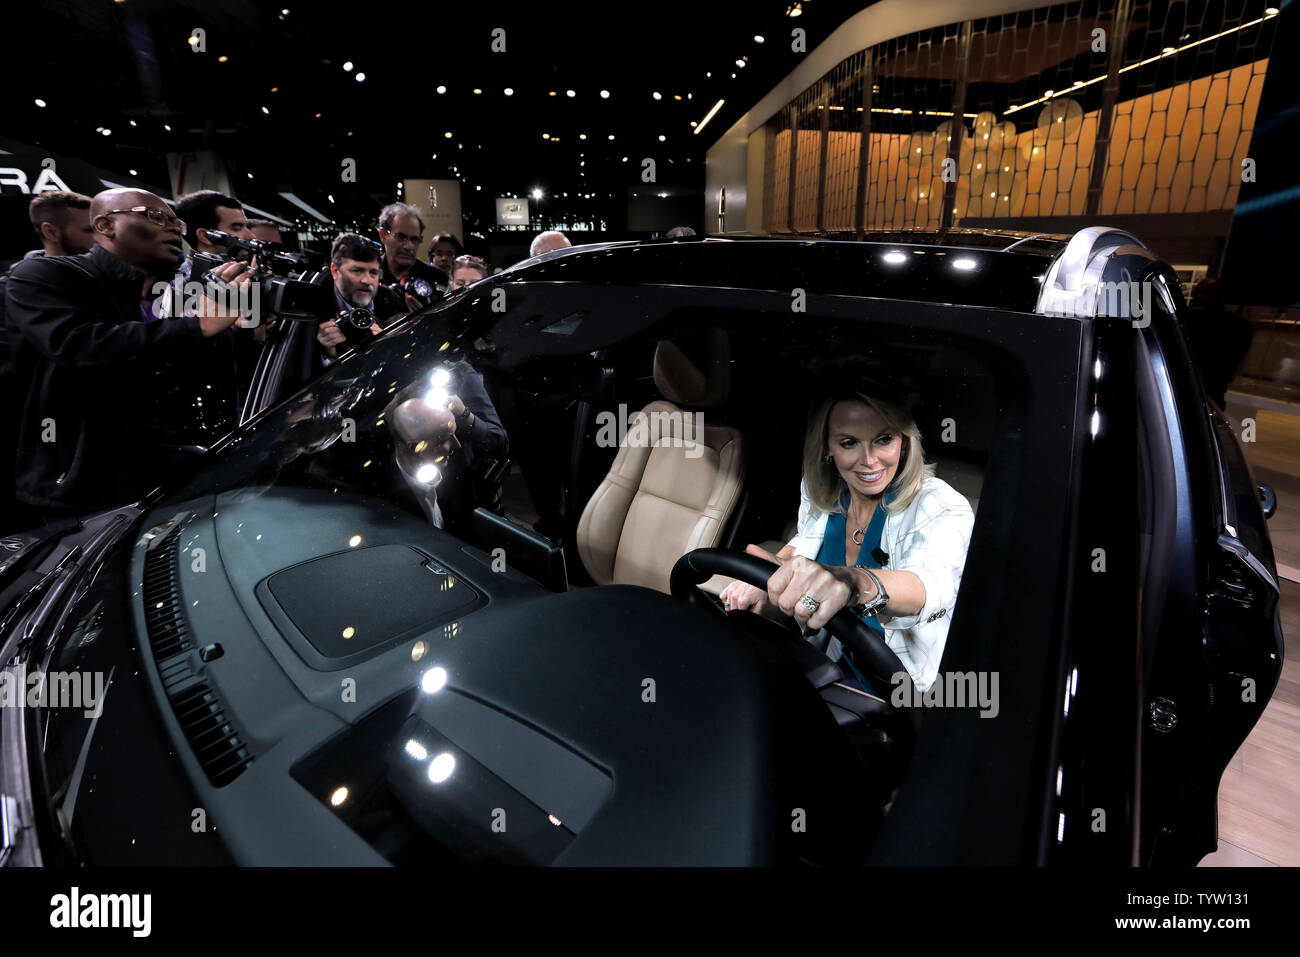 Joy Falotico, president of Lincoln Motor Company sits behind the wheel of  the 2019 Lincoln Corsair SUV on display at the Lincoln presentation at the 2019 New York International Auto Show at the Jacob K. Javits Convention Center in New York City on April 17, 2019. The first New York Auto Show was held in 1900 and it was the first auto show ever held in North America. About 1 million visitors are expected to attend the show.      Photo by Peter Foley/UPI Stock Photo